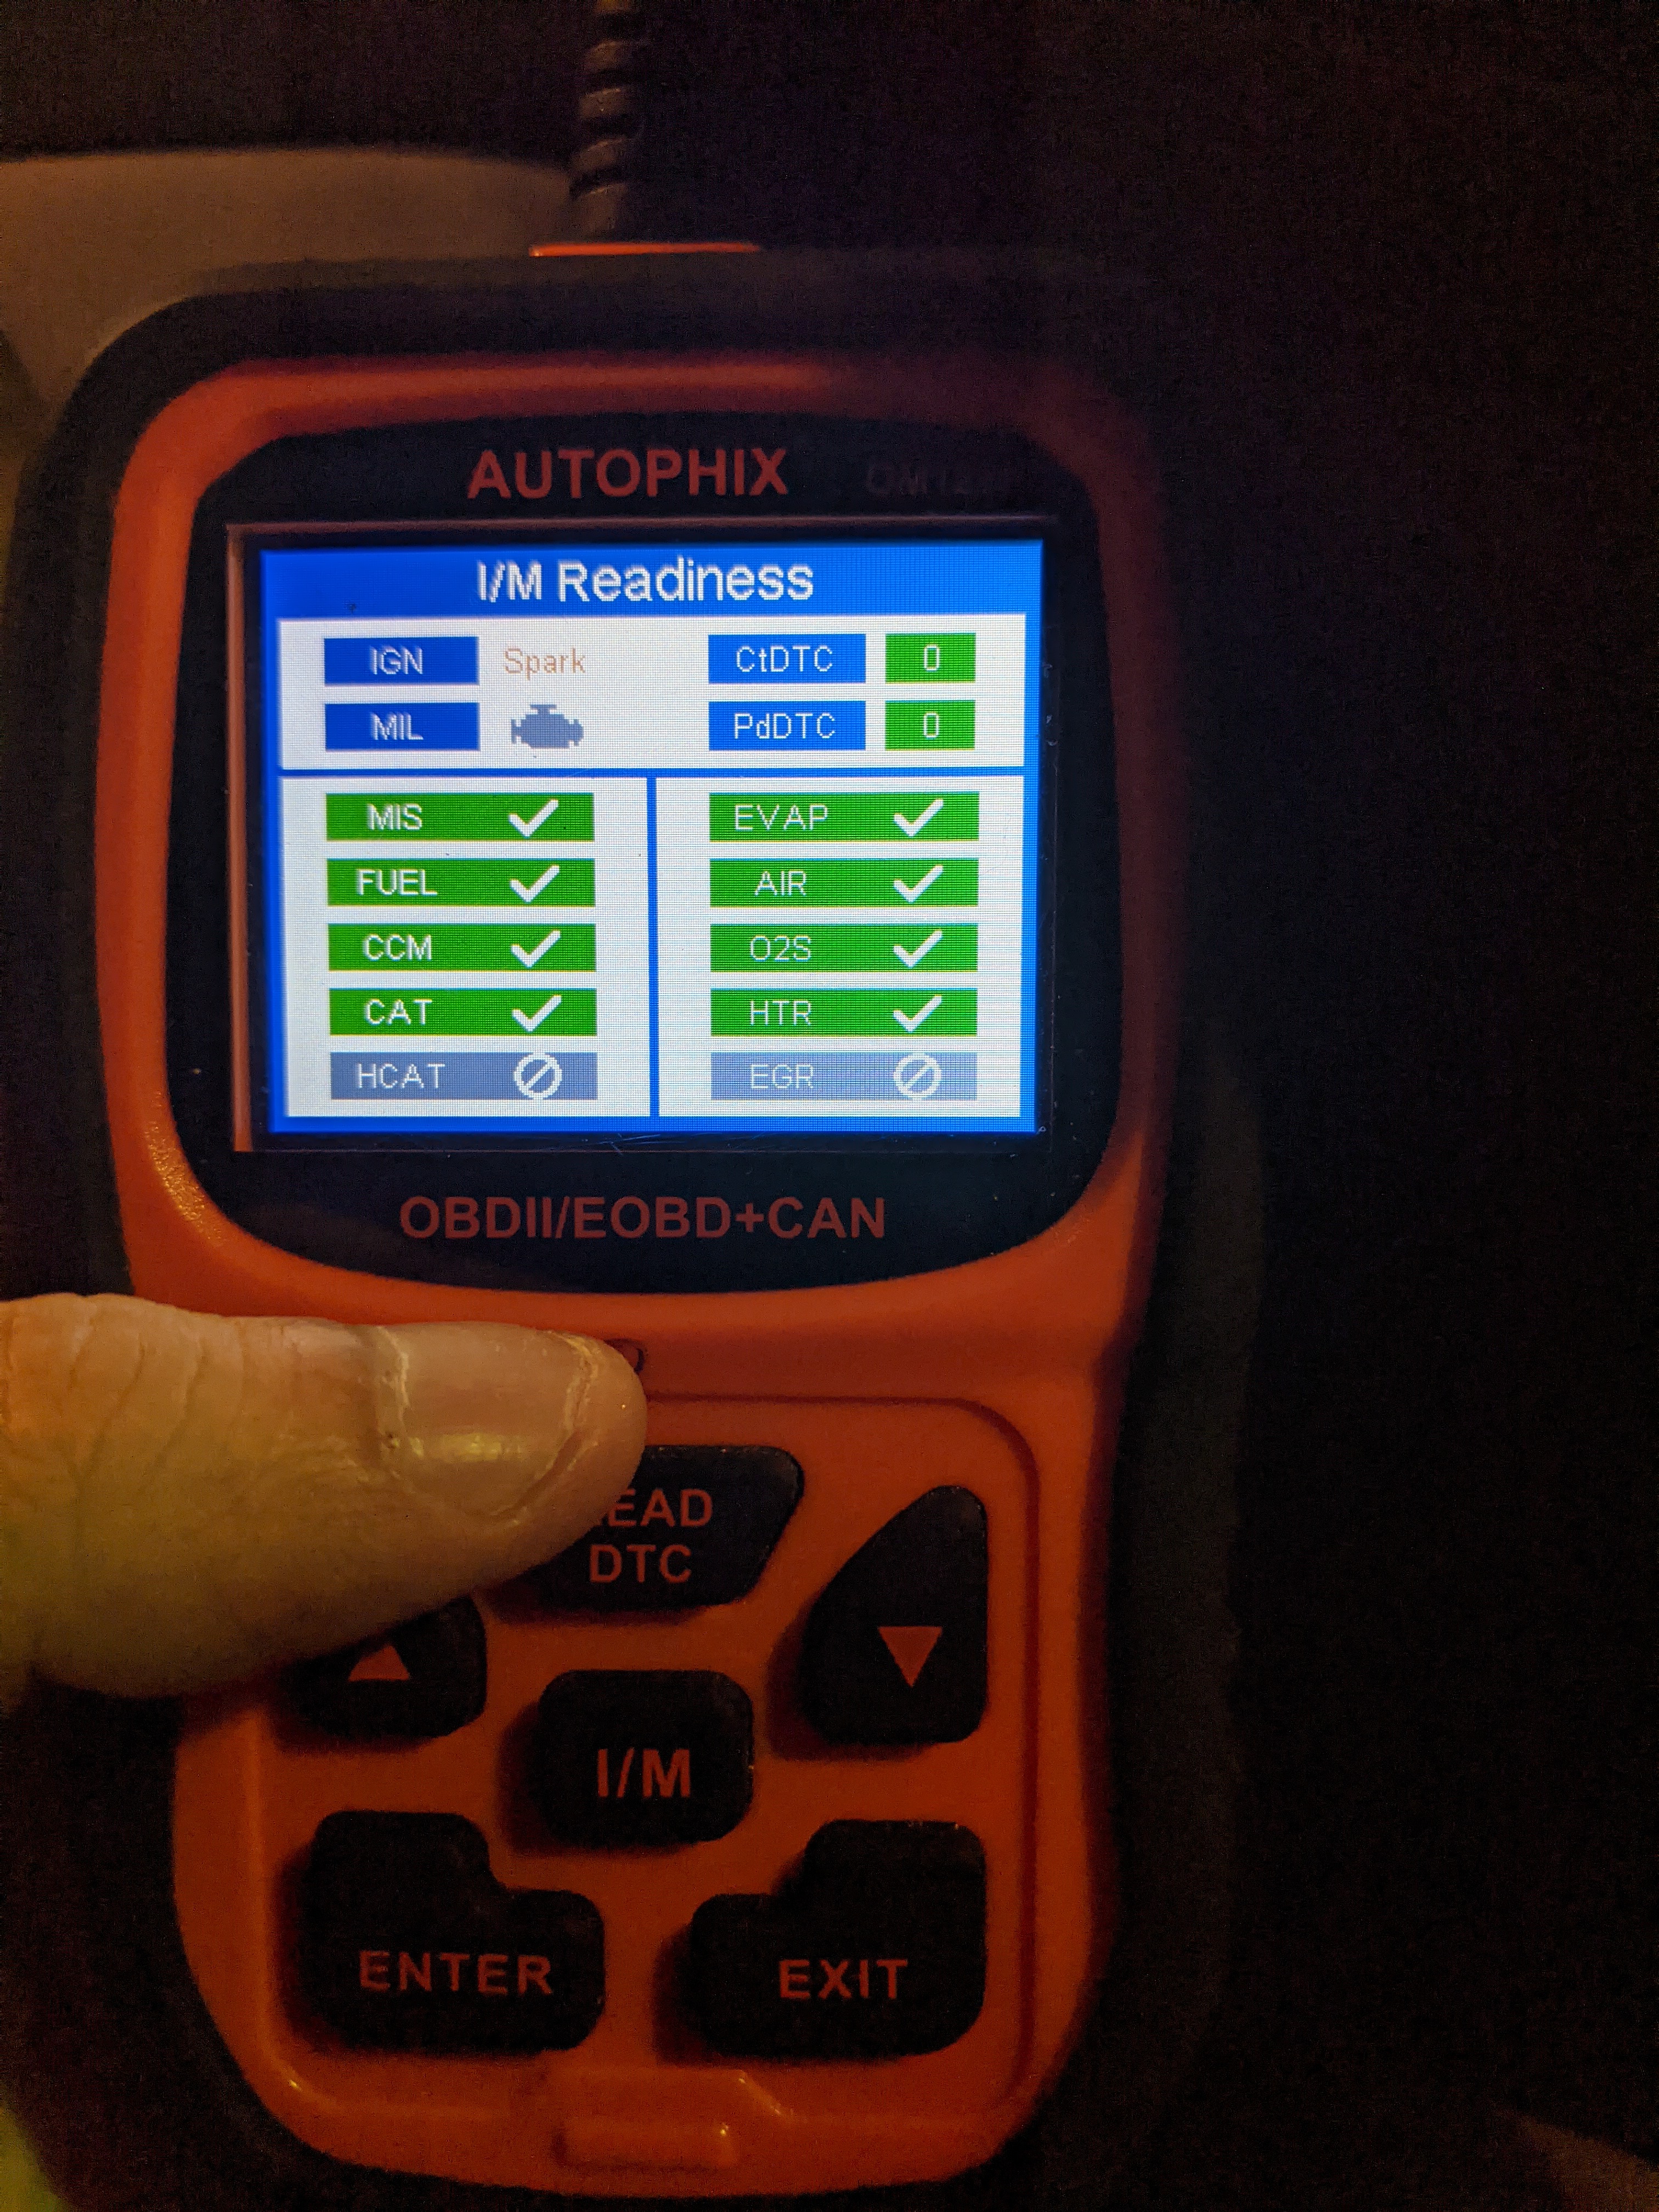 S-line Autoworks scanner I/M Readiness